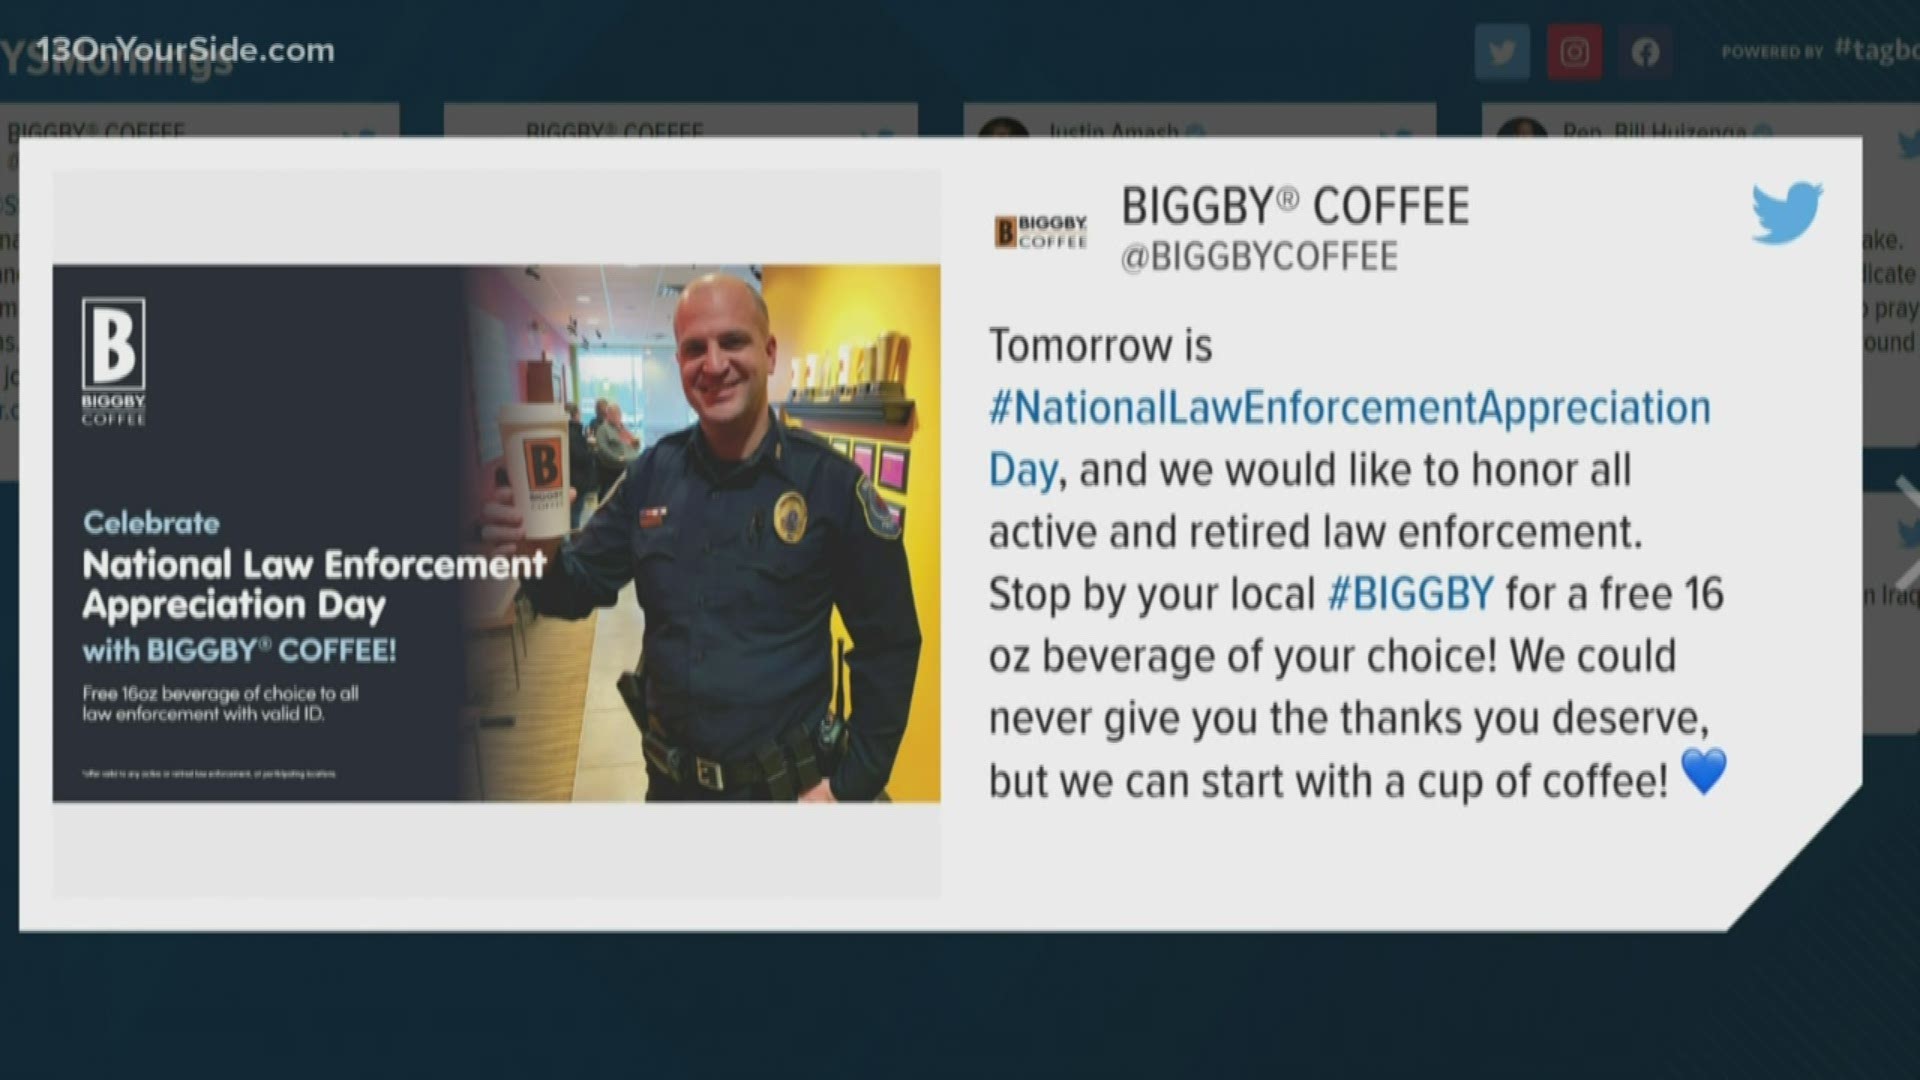 To honor all active and retired law enforcement, Biggby is offering free 16 oz. beverages all day Thursday.